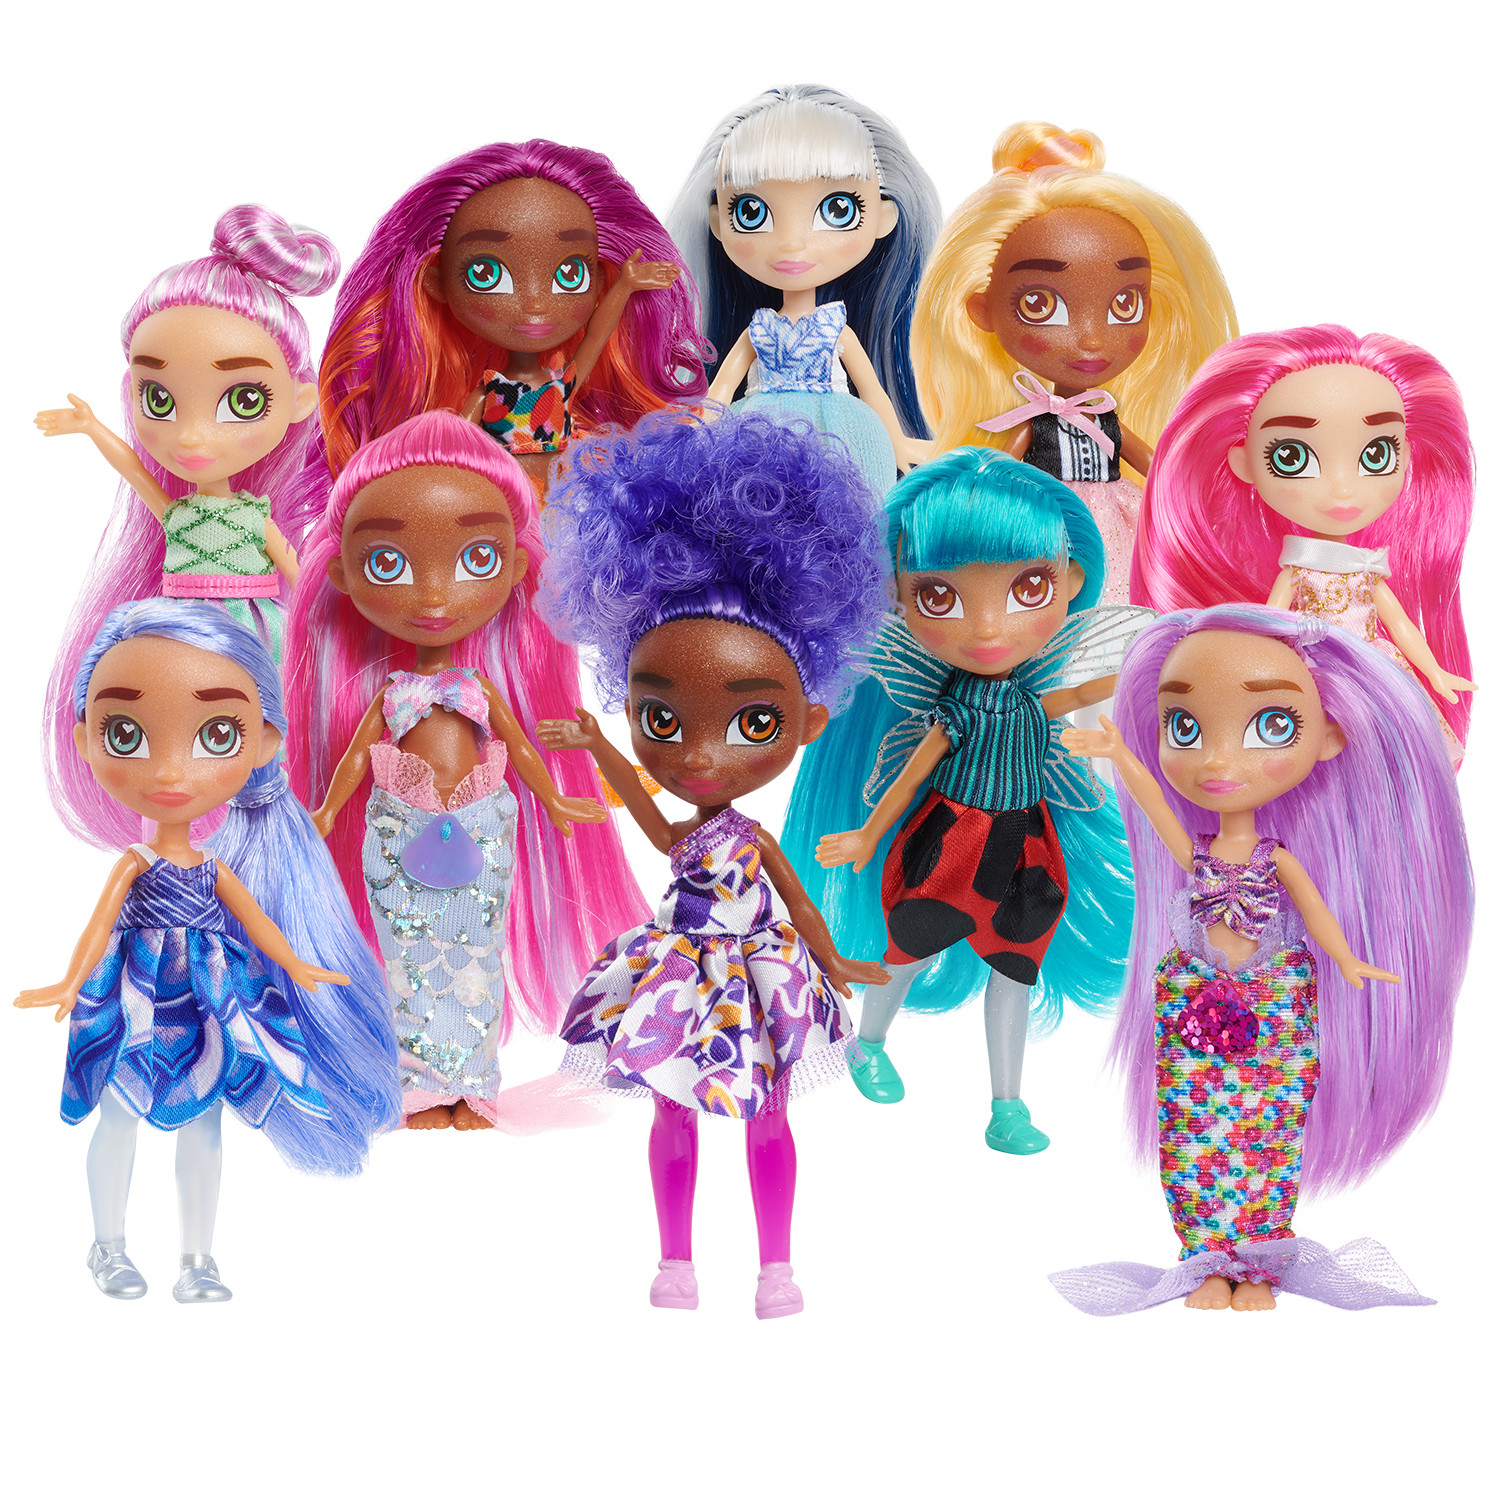 Hairmazing 10-Pack Collectible Small Dolls Set, Kids Toys for Ages 3 up - image 15 of 15